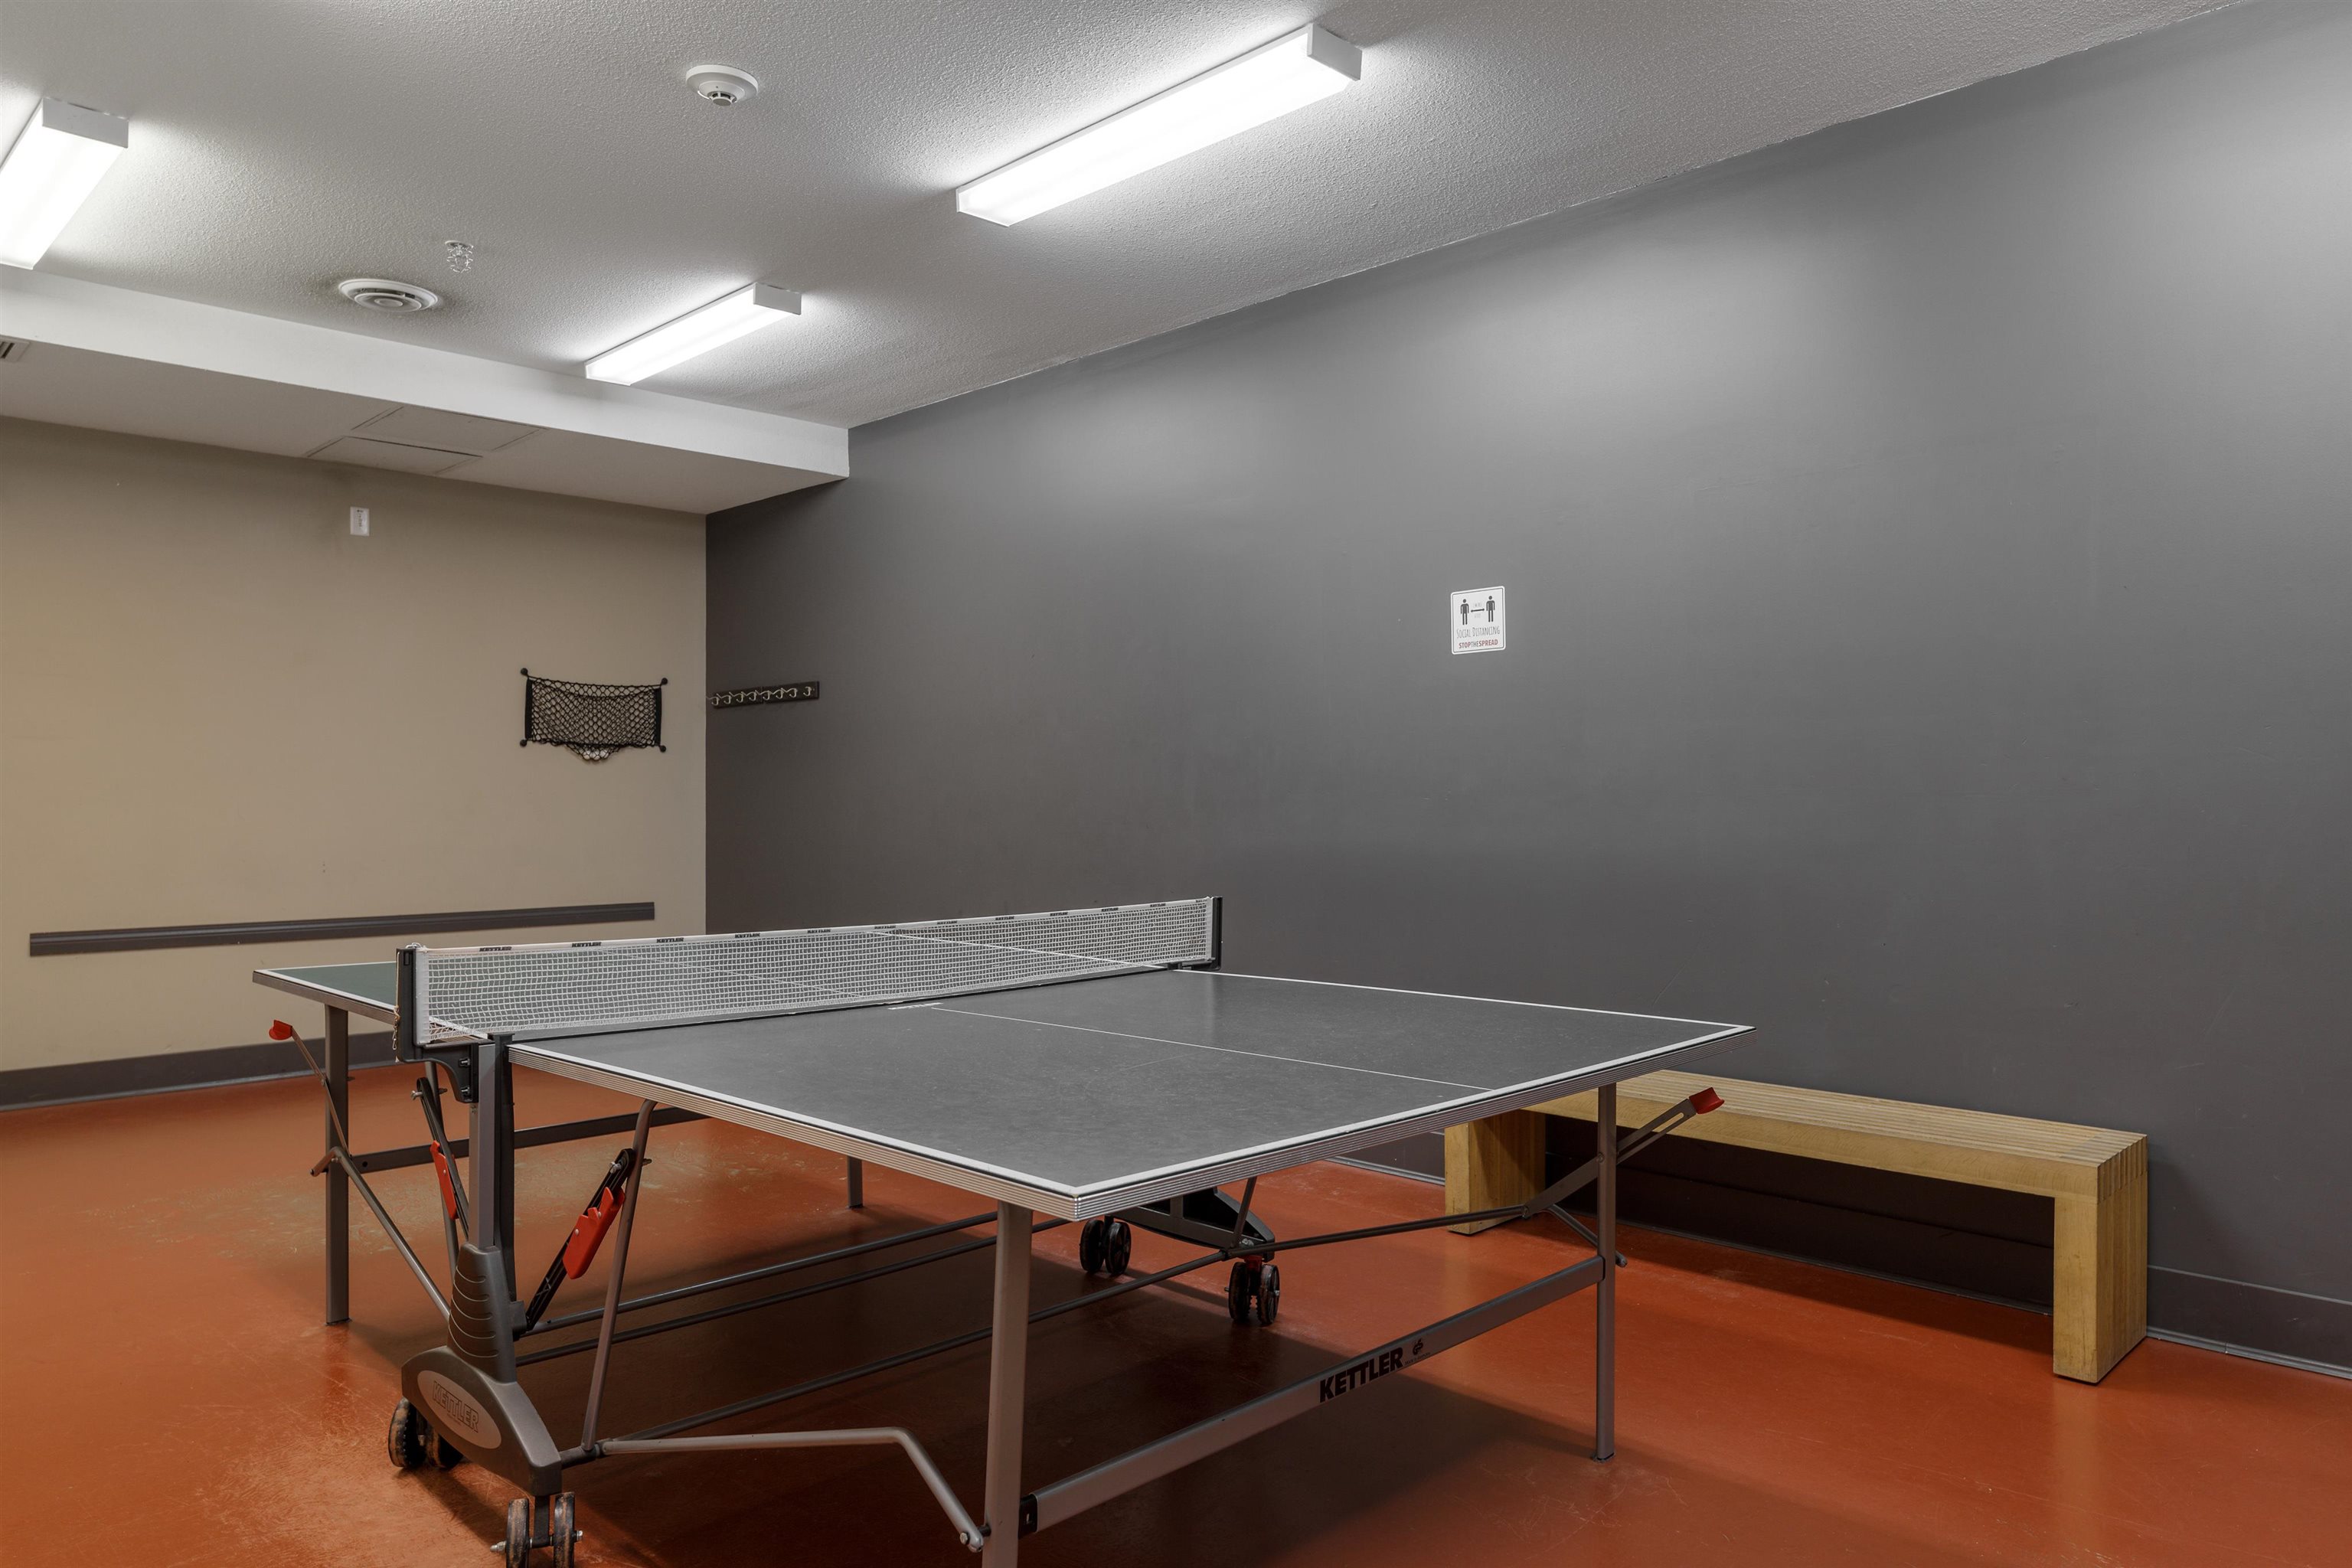 Challenge your friends to a round of ping pong